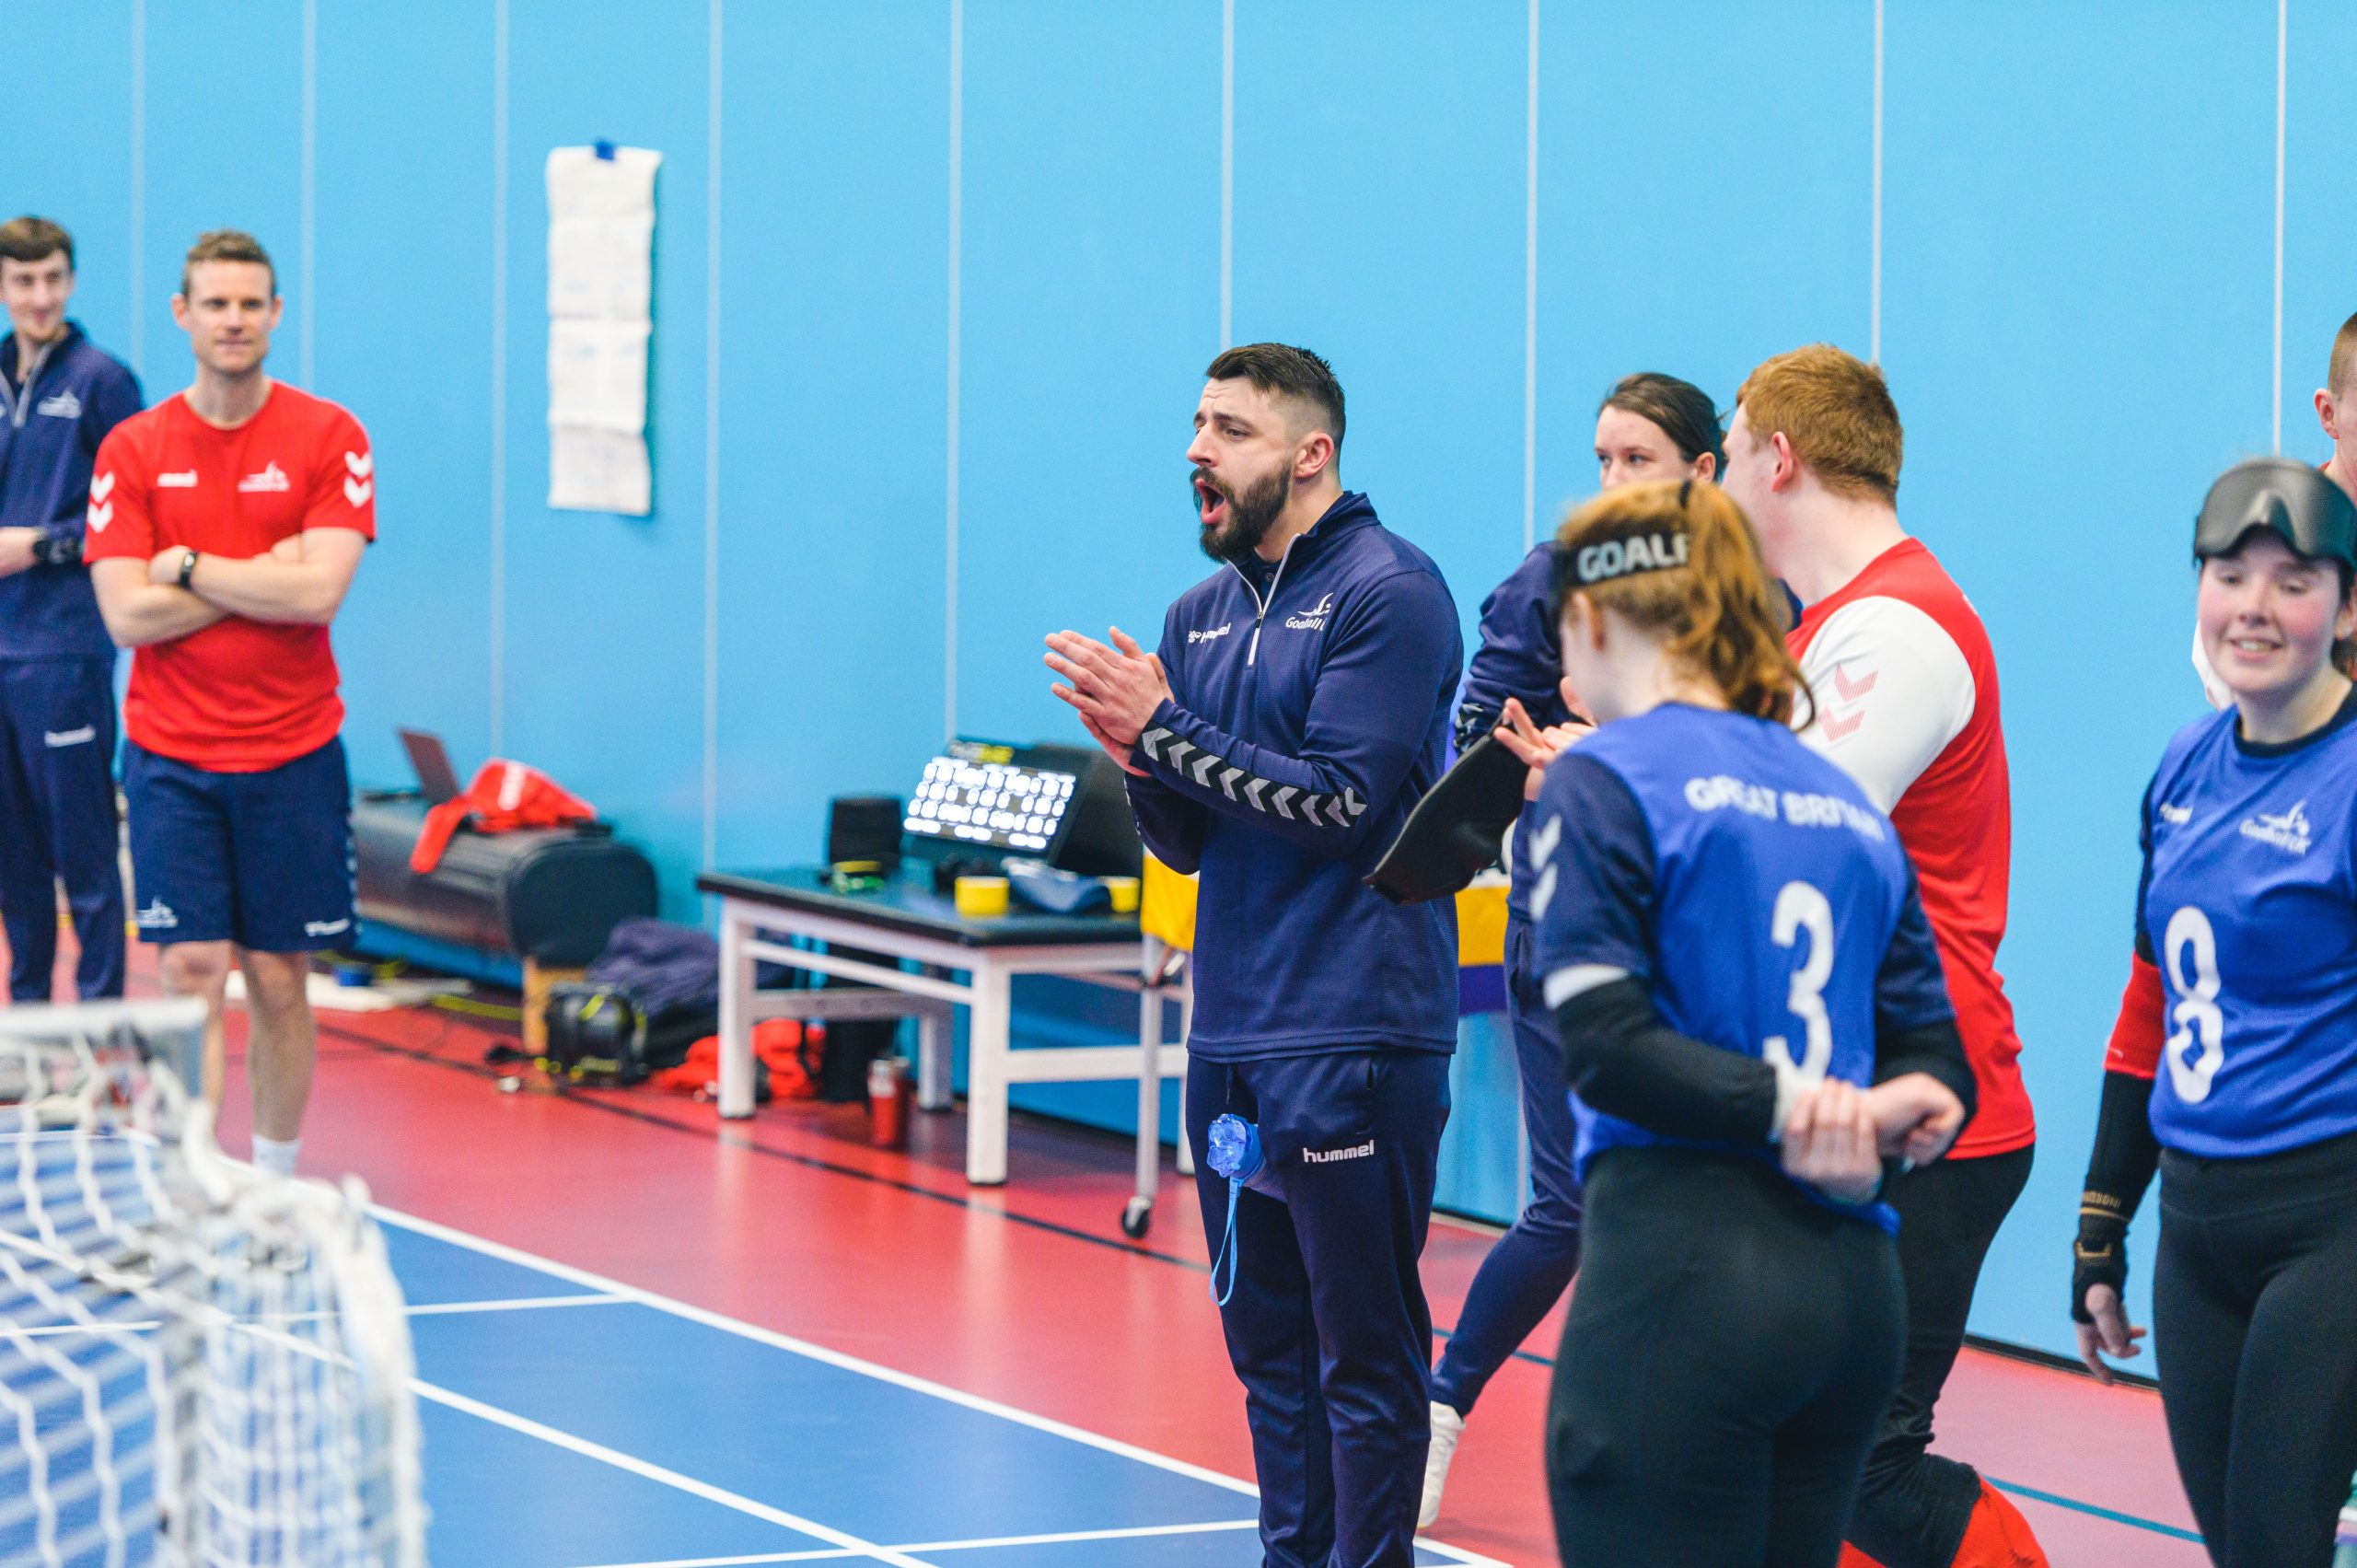 During a GB training camp a male coach is shouting and clapping his hands together to encourage players